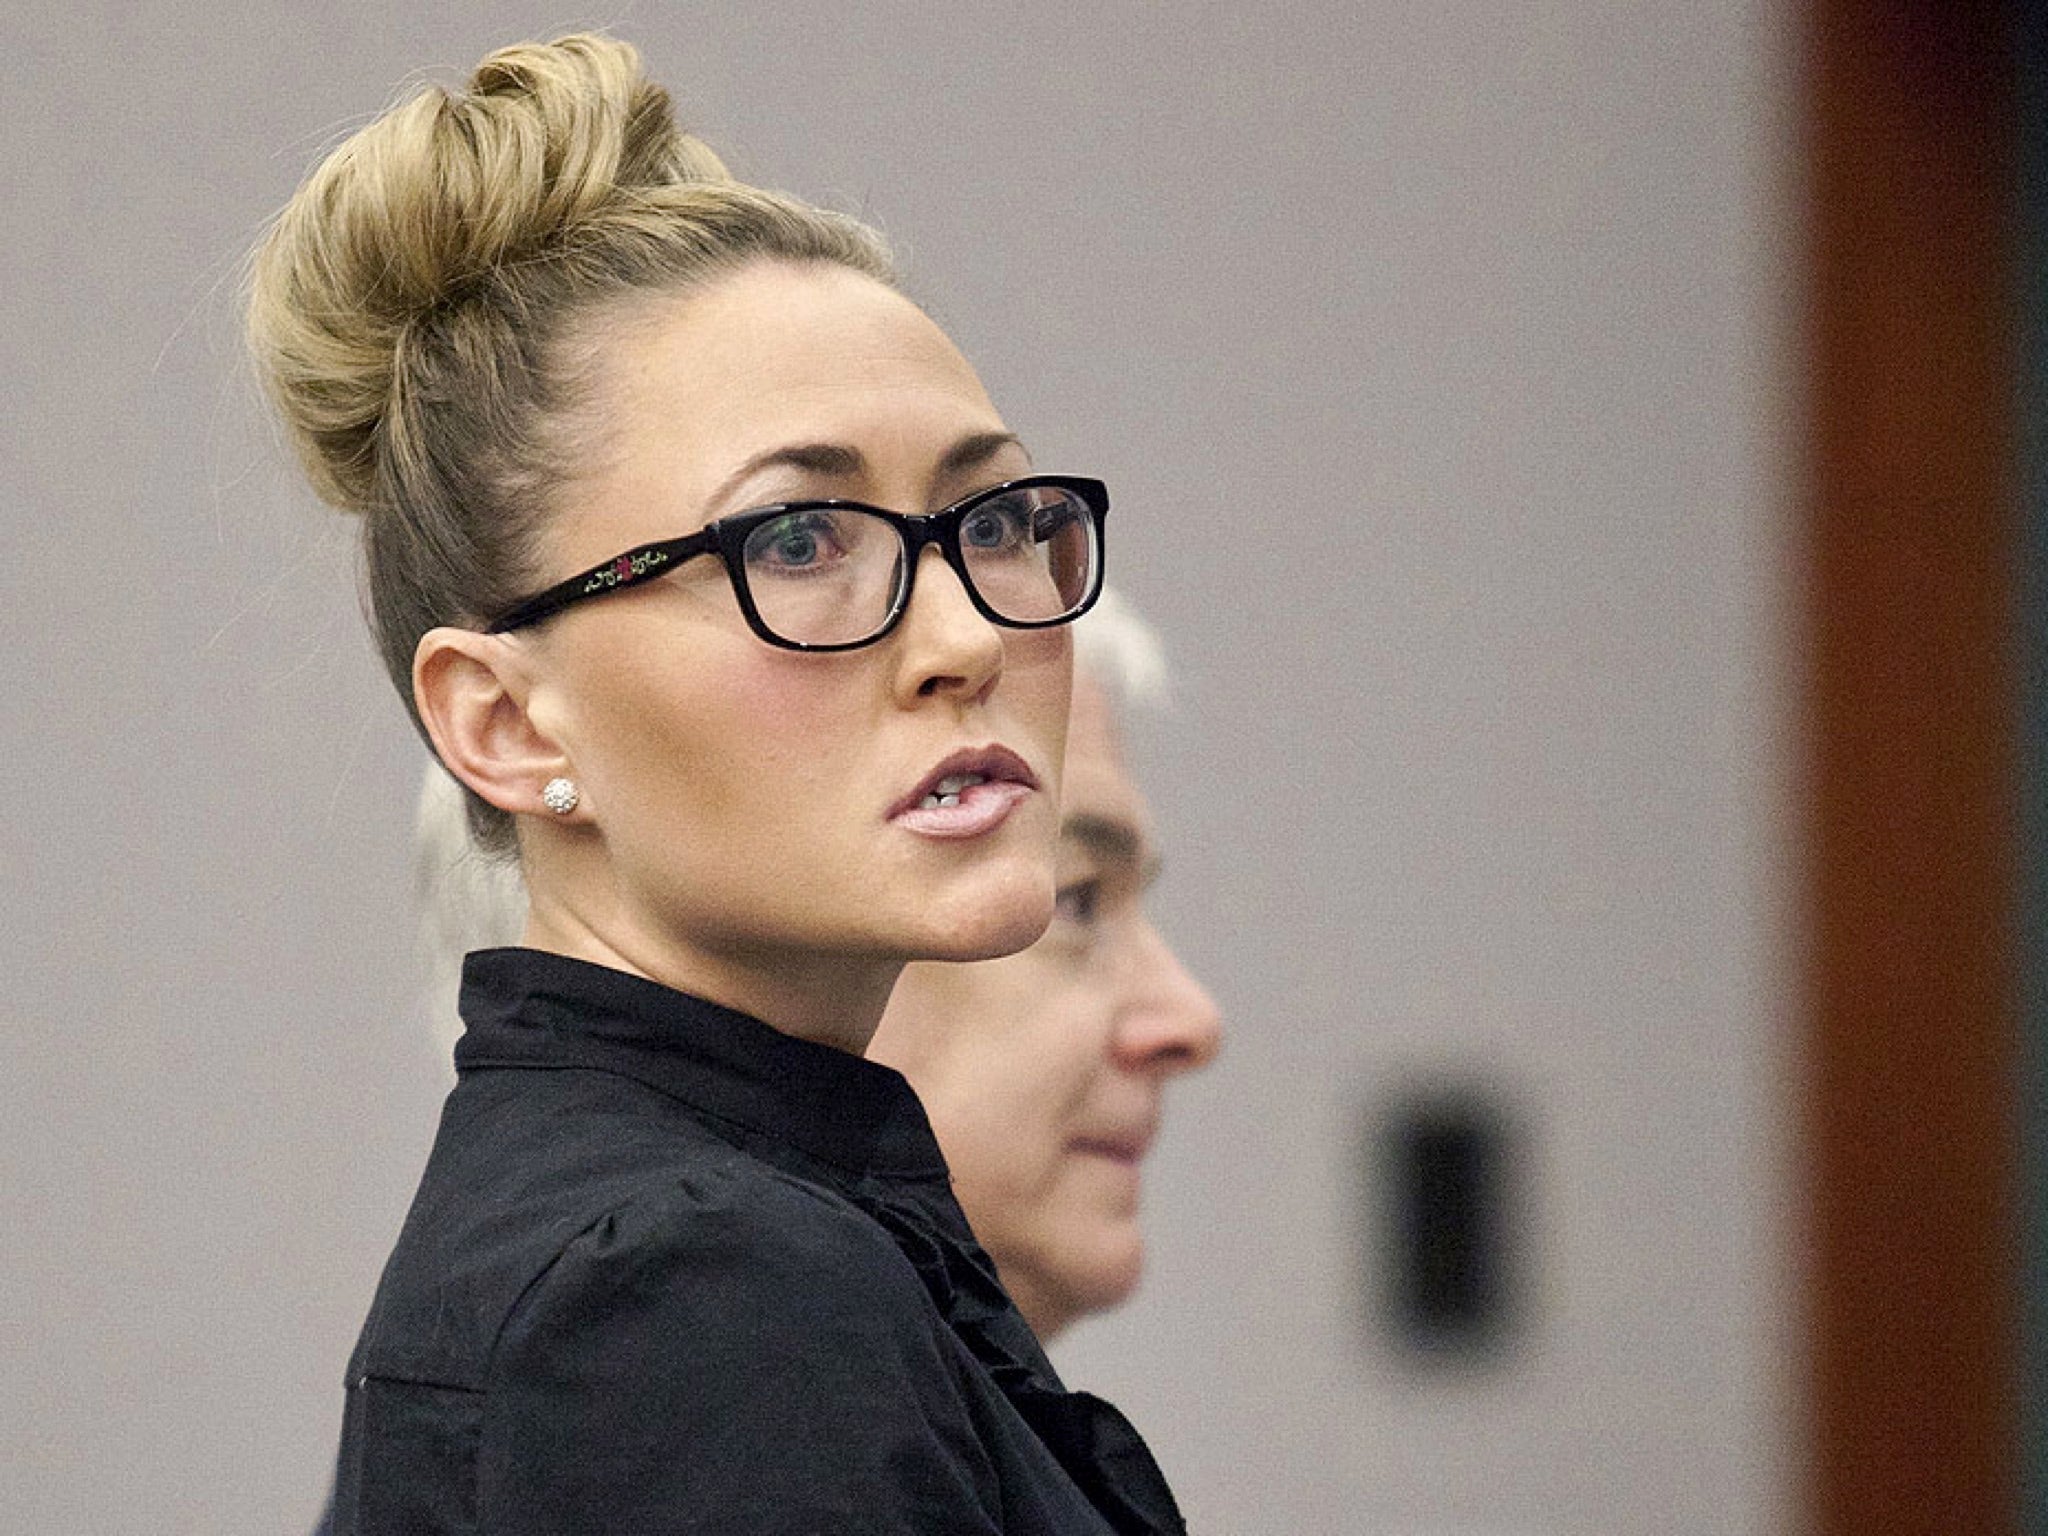 Utah teacher Brianne Altice defends relationship with teenage student The Independent The Independent pic